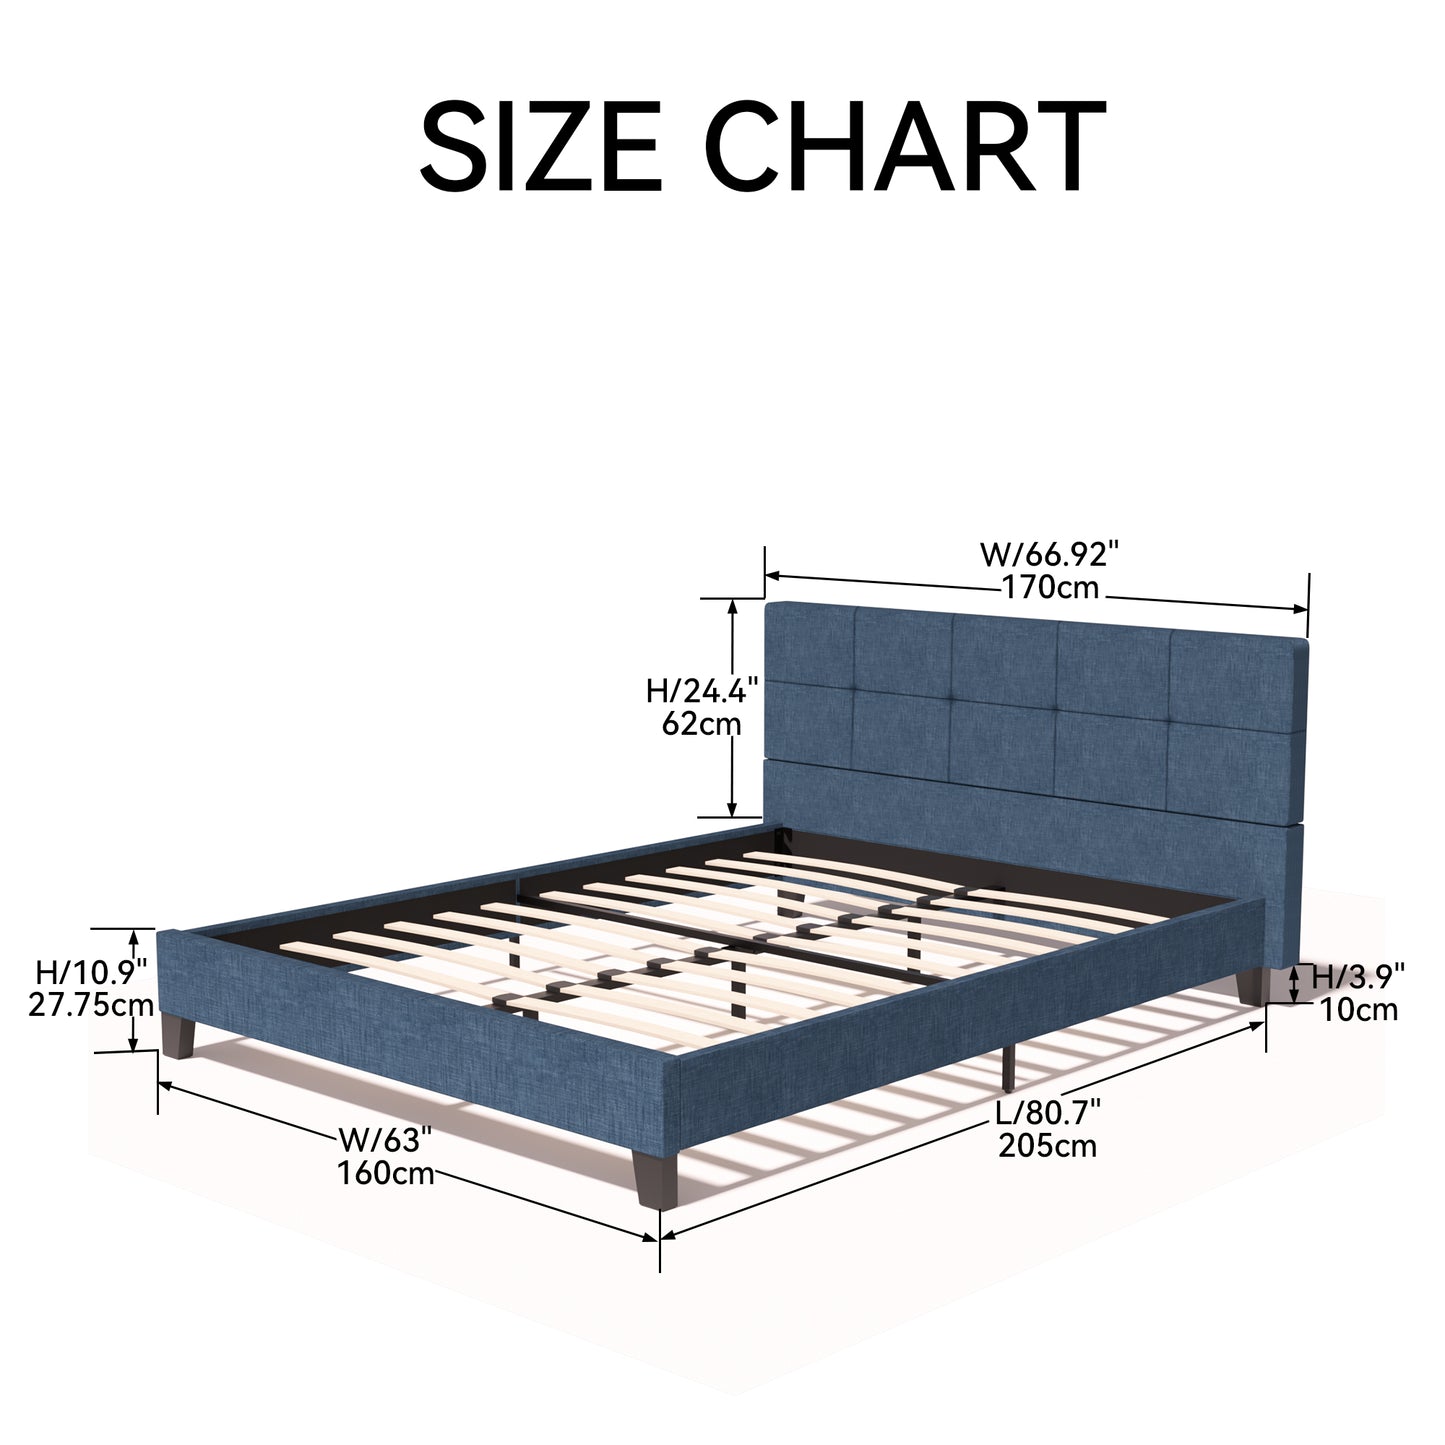 Dark Blue Upholstered Fabric Platform Bed Frame Queen Size with Tufted Square Stitched Headboard, Metal Frame Mattress Foundation with Strong Wooden Slat Support, 800LBS Weight Capacity